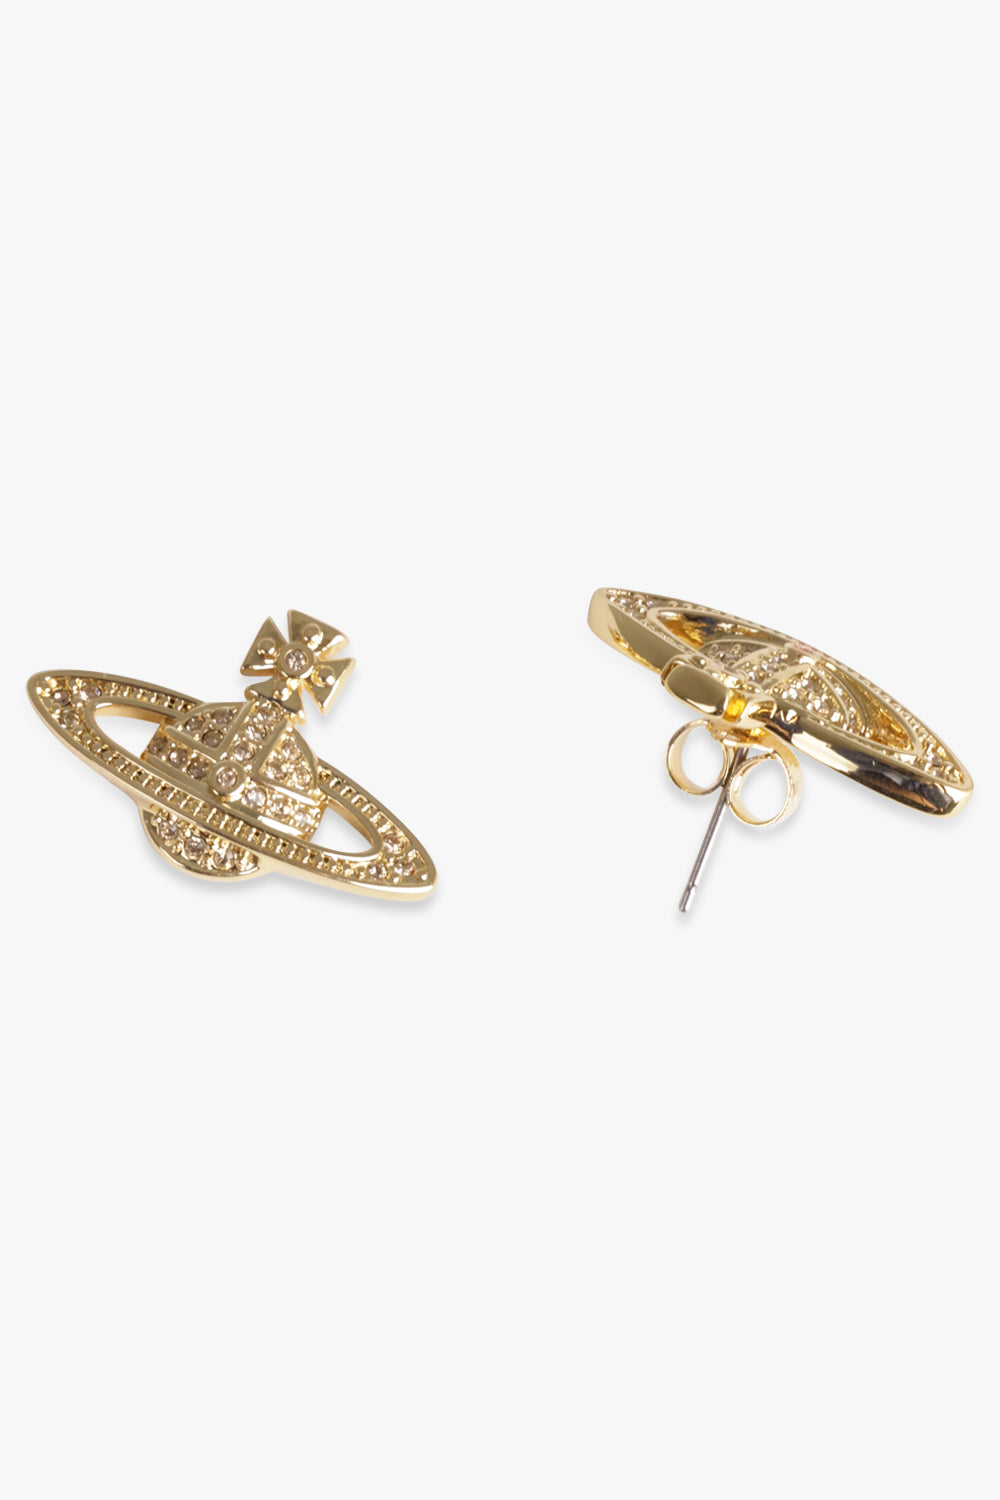 VIVIENNE WESTWOOD JEWELLRY GOLD / GOLD MINI BAS RELIEF EARRINGS | GOLD